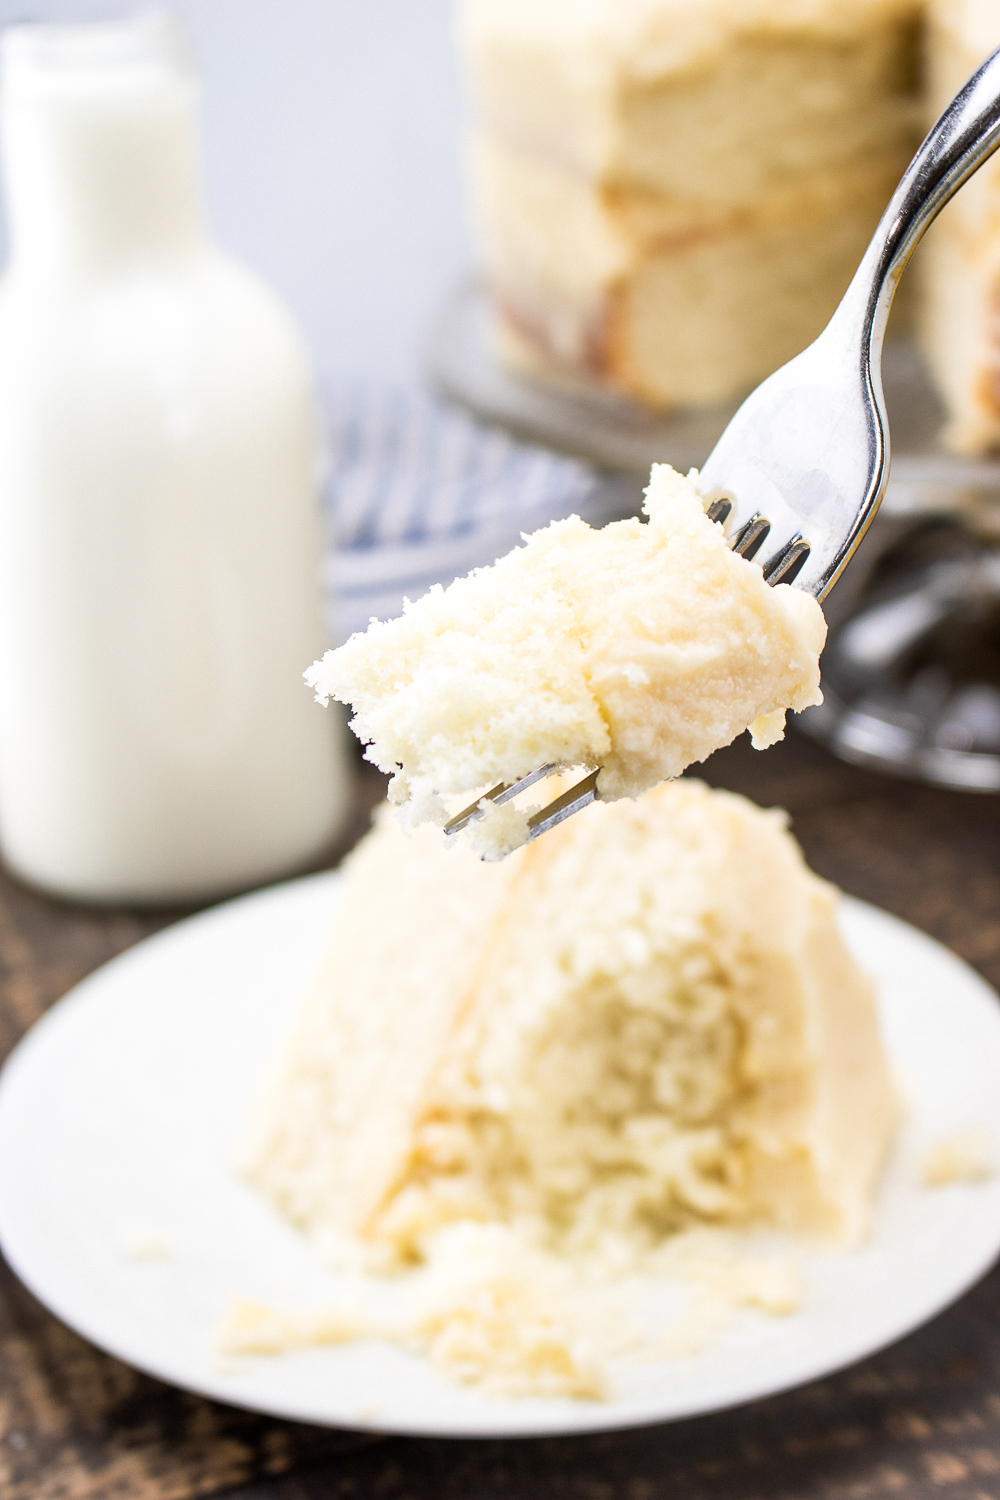 Looking for a delicious and classic white cake recipe? Look no further! This recipe is easy to follow and yields a moist and fluffy cake.